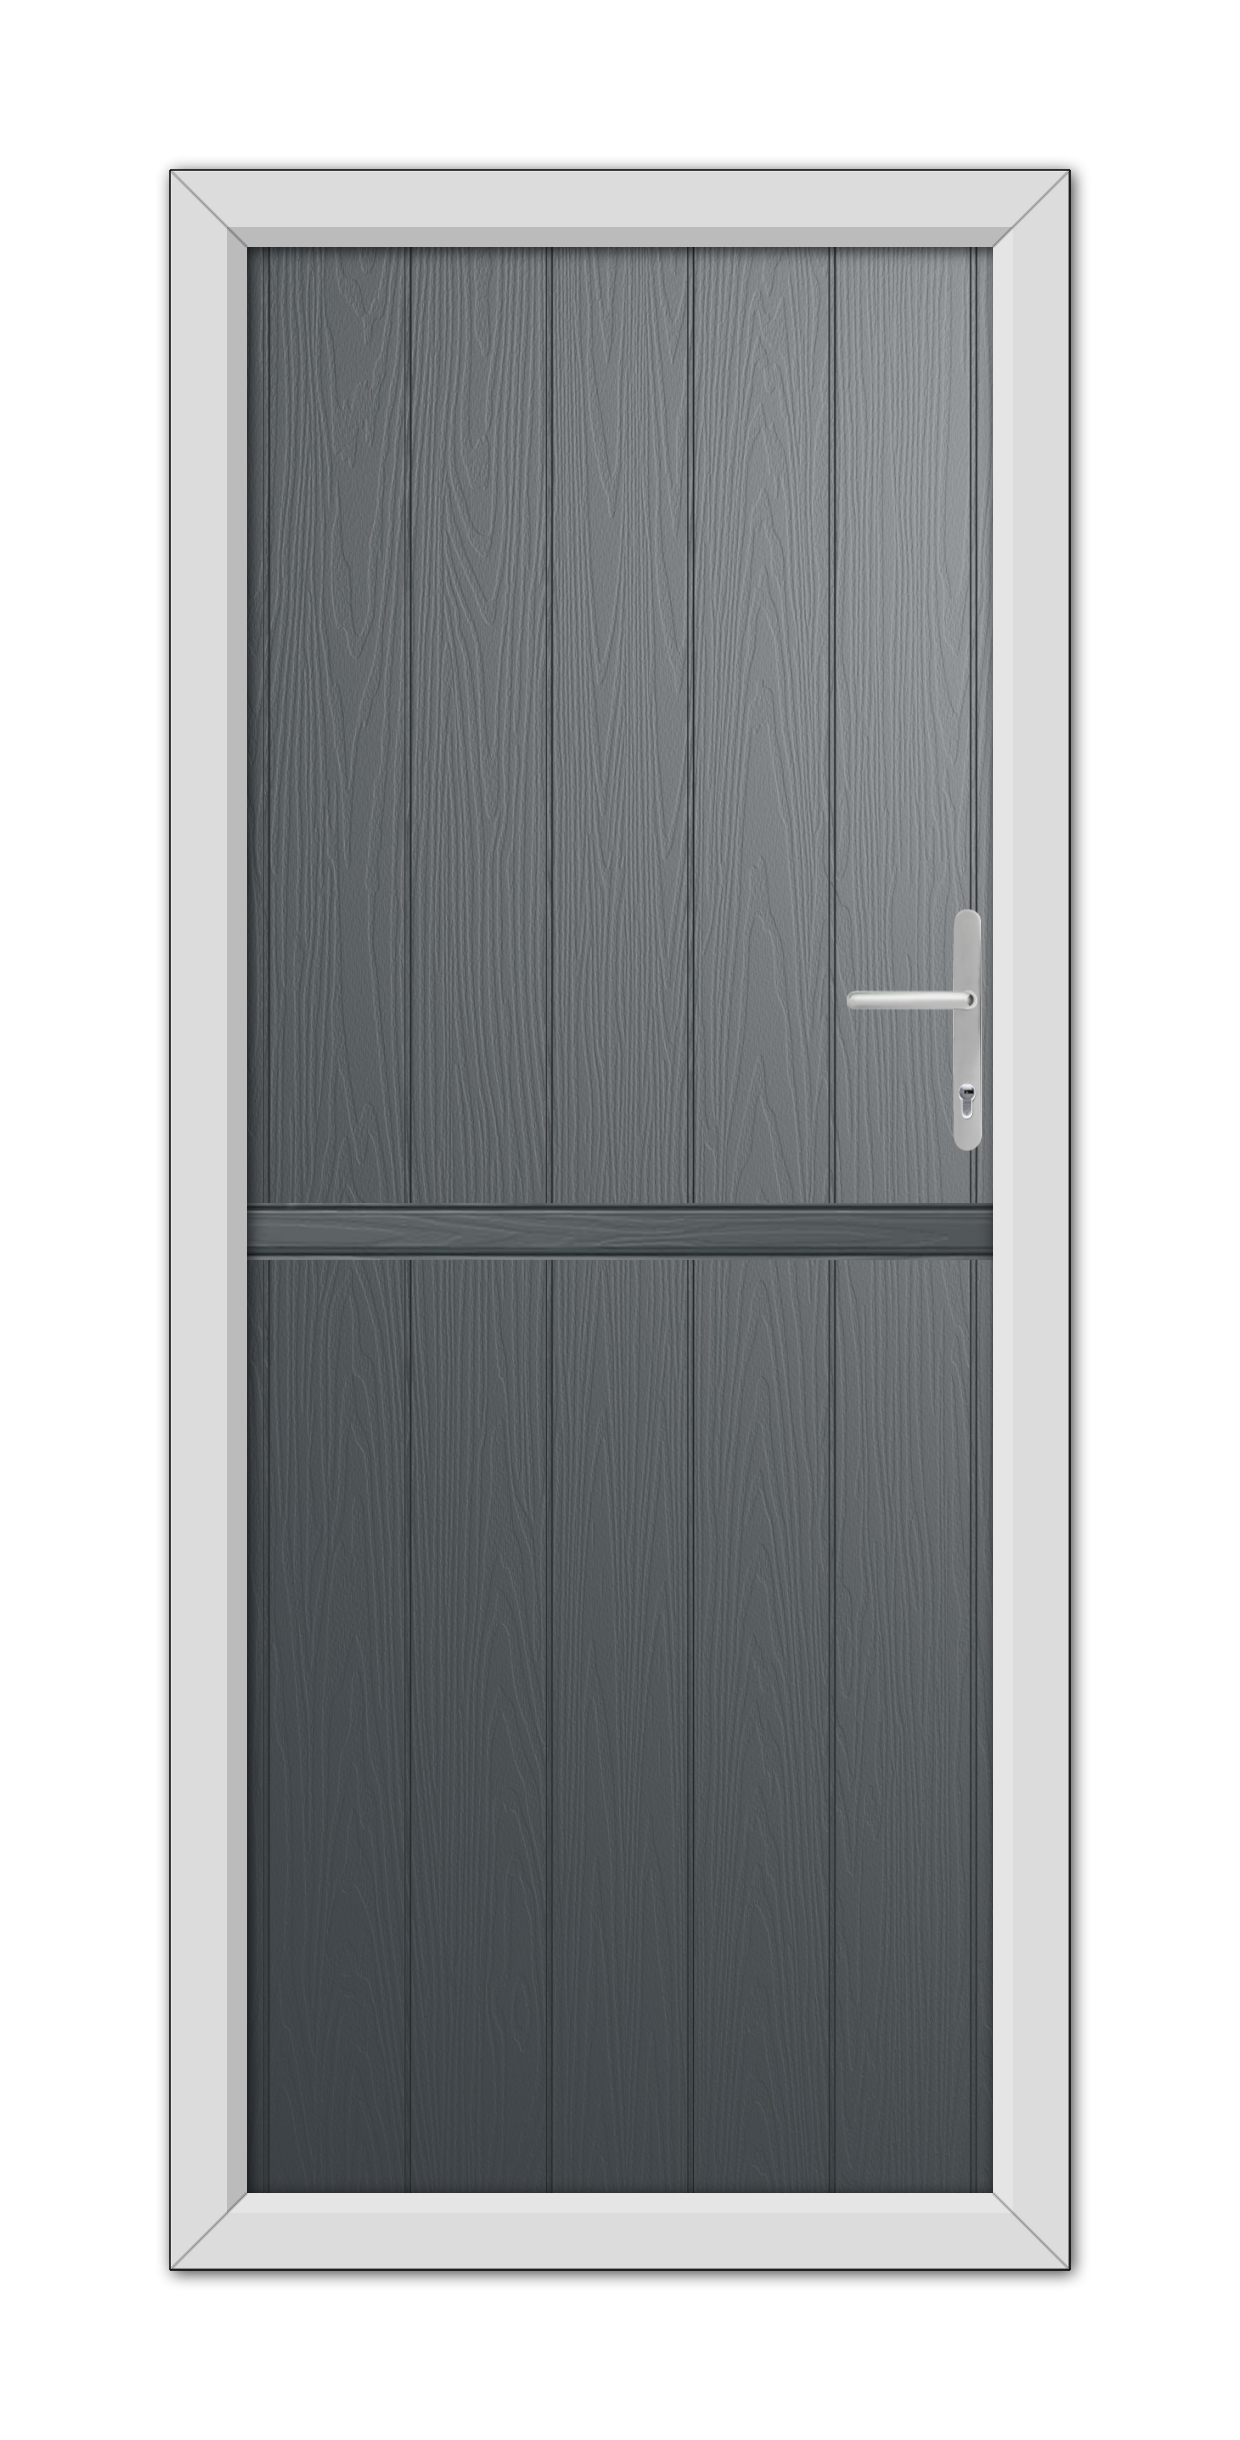 A contemporary Anthracite Grey Norfolk Solid Stable Composite Door 48mm Timber Core with a simple metal handle, framed by a white door frame, depicted in a frontal view.